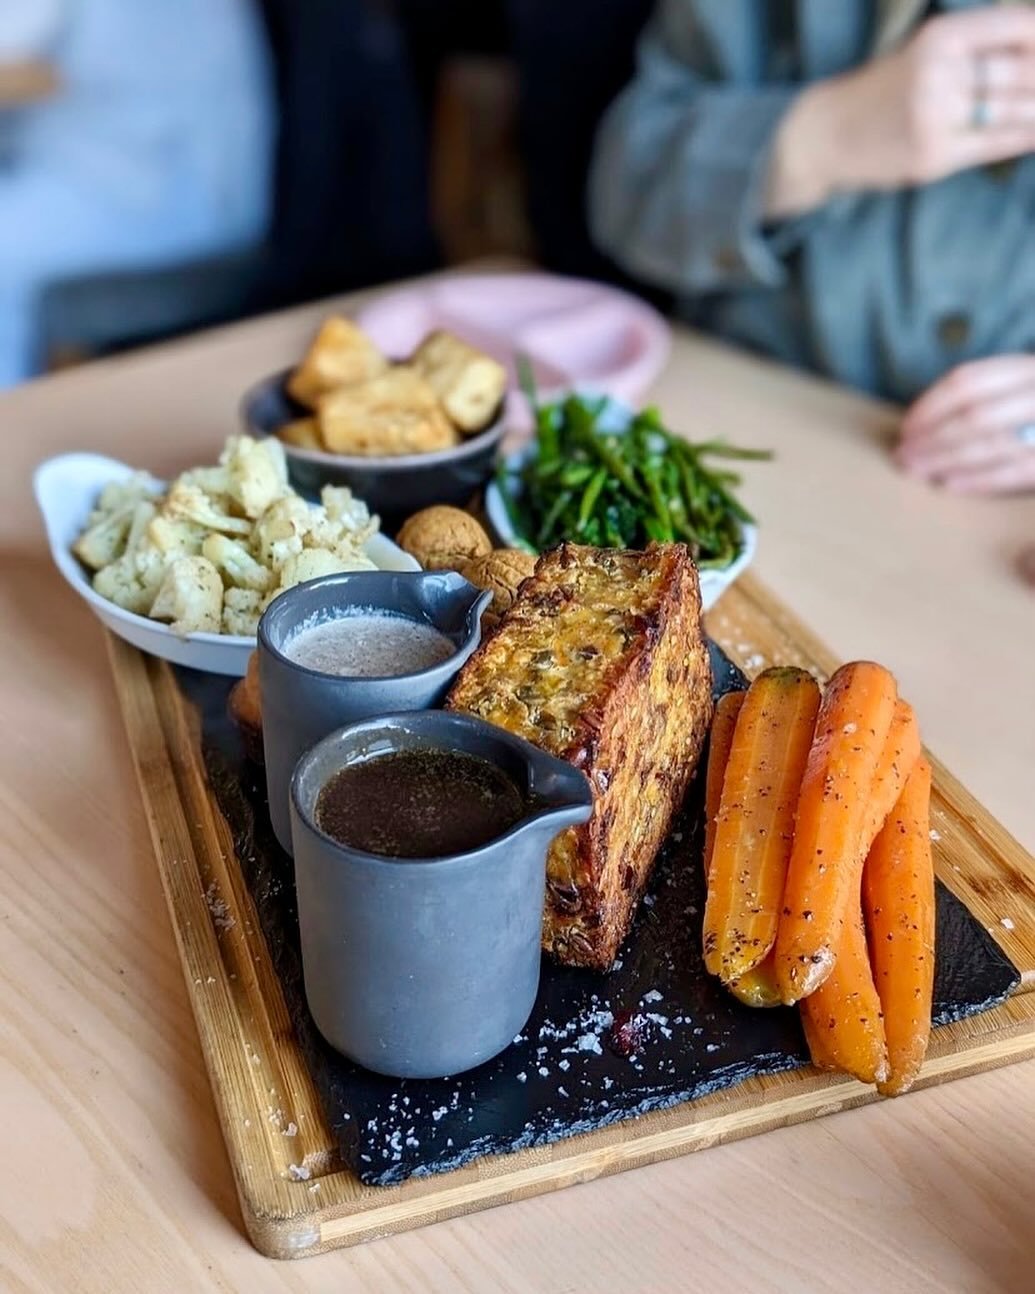 Did you know we also offer vegan/vegetarian Sunday Roast sharing board options? We don&rsquo;t want anyone feeling left out! Enquire with your server about our vegan/vegetarian options🥦 we still have some tables left for a Sunday Roast so give us a 